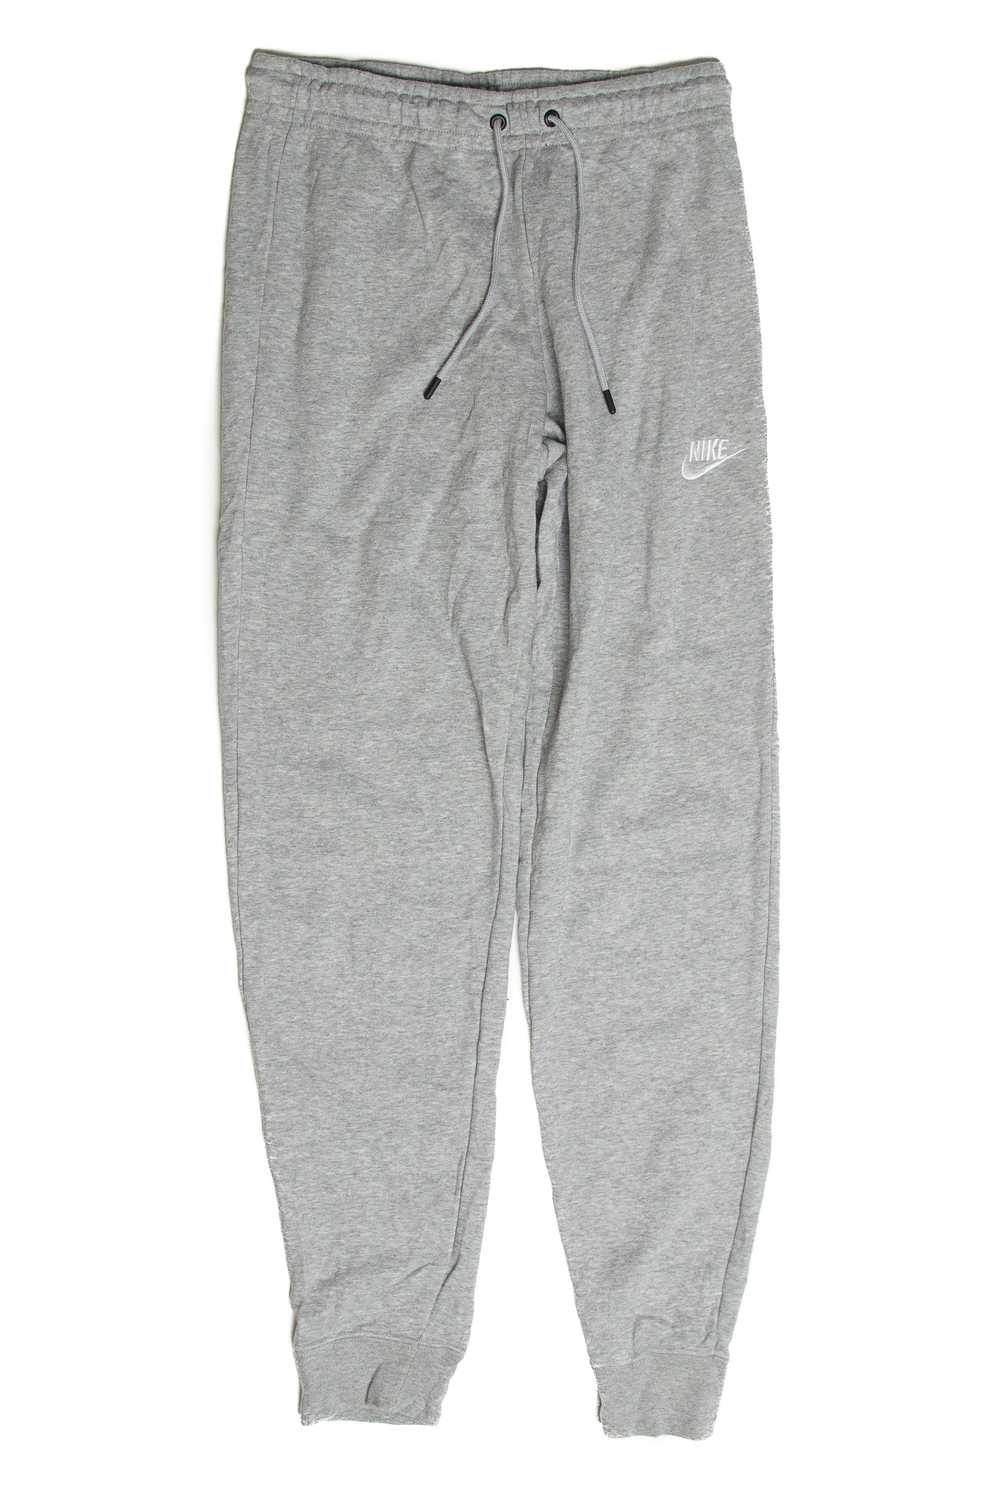 Recycled Nike Track Pants 1313 - image 1